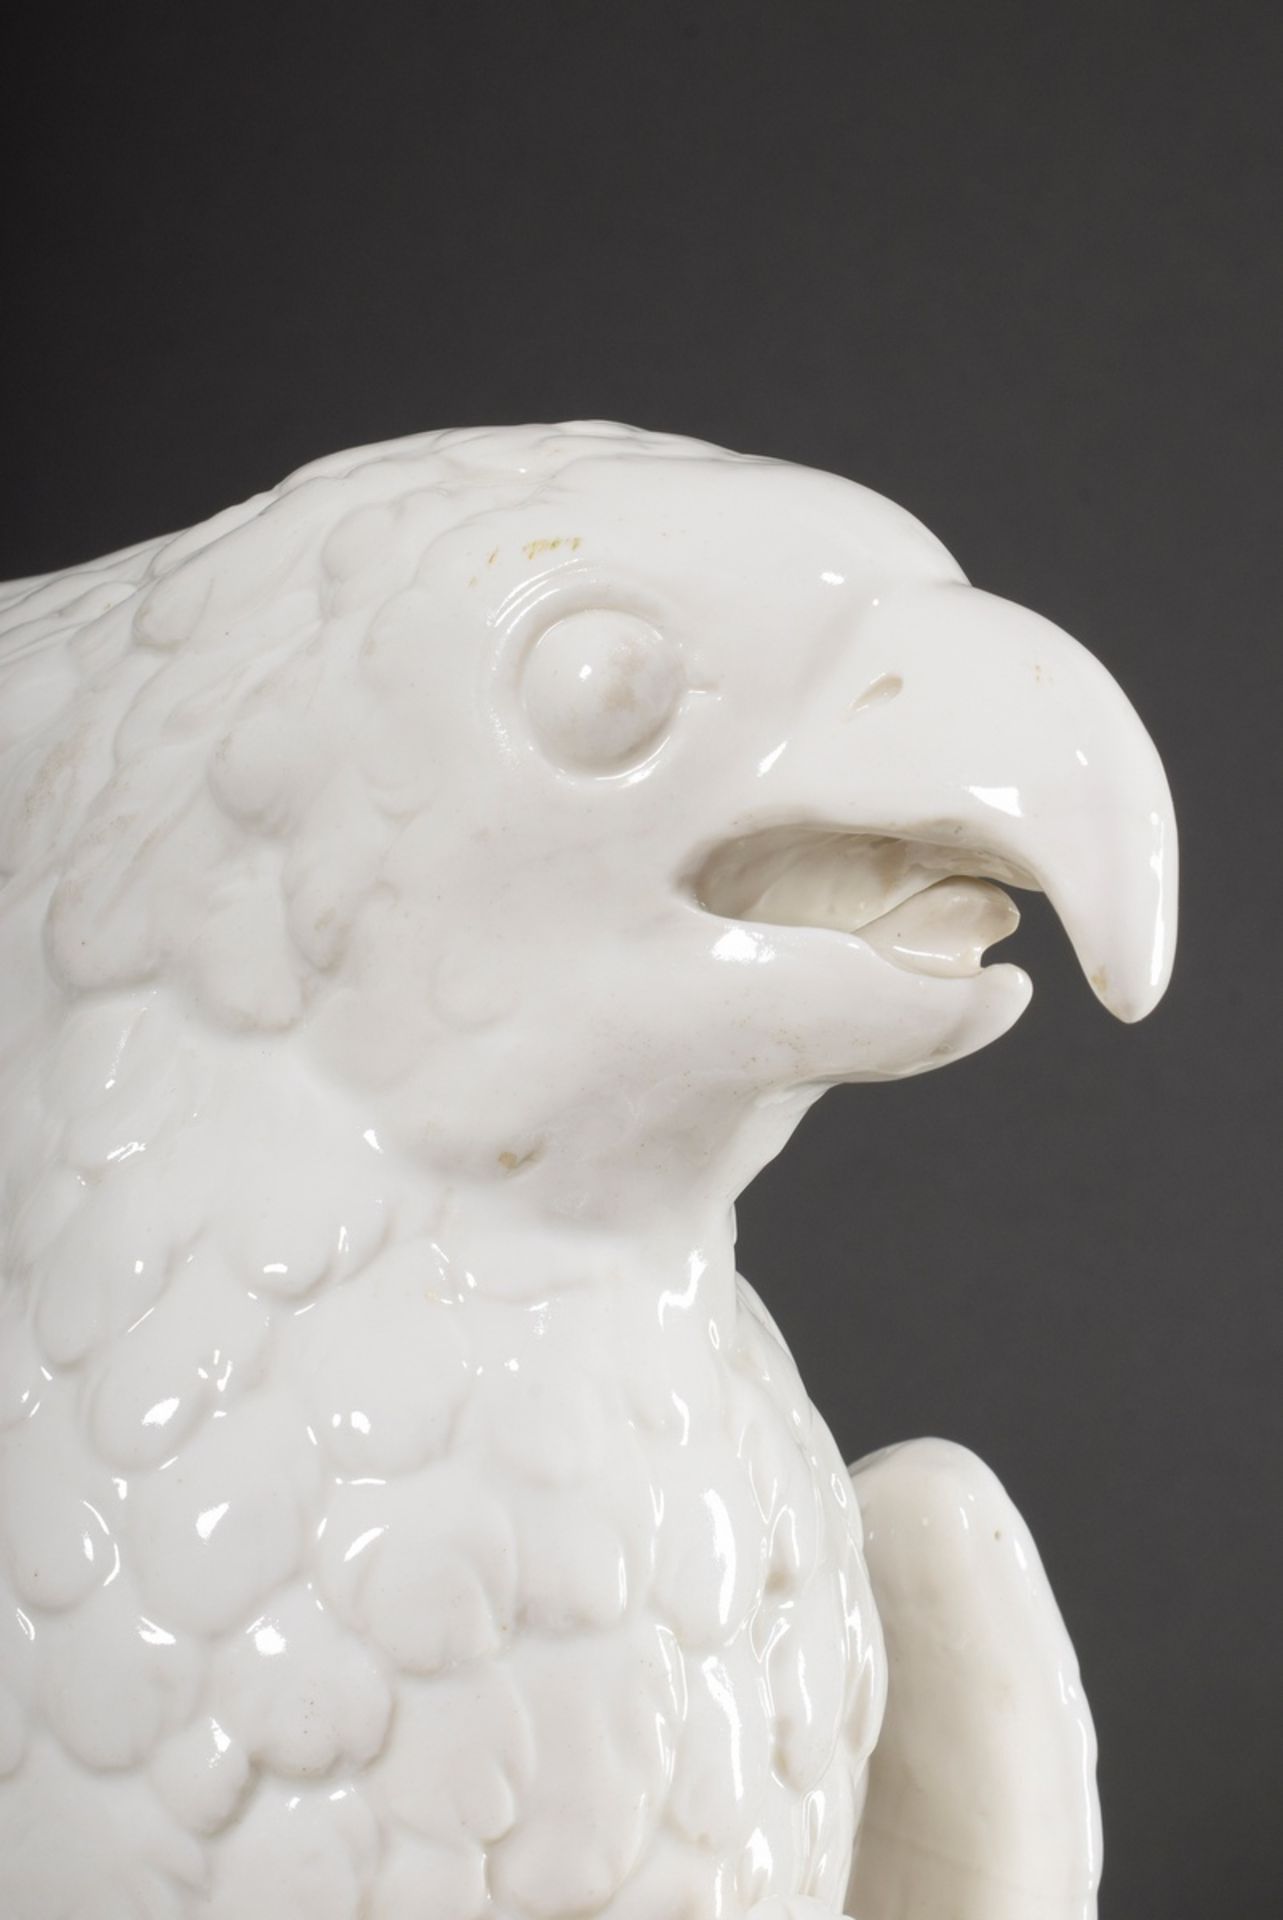 Nymphenburg "Cockatoo with closed wings", white porcelain, incised no. 448, bossier no. 3, diamond- - Image 4 of 7